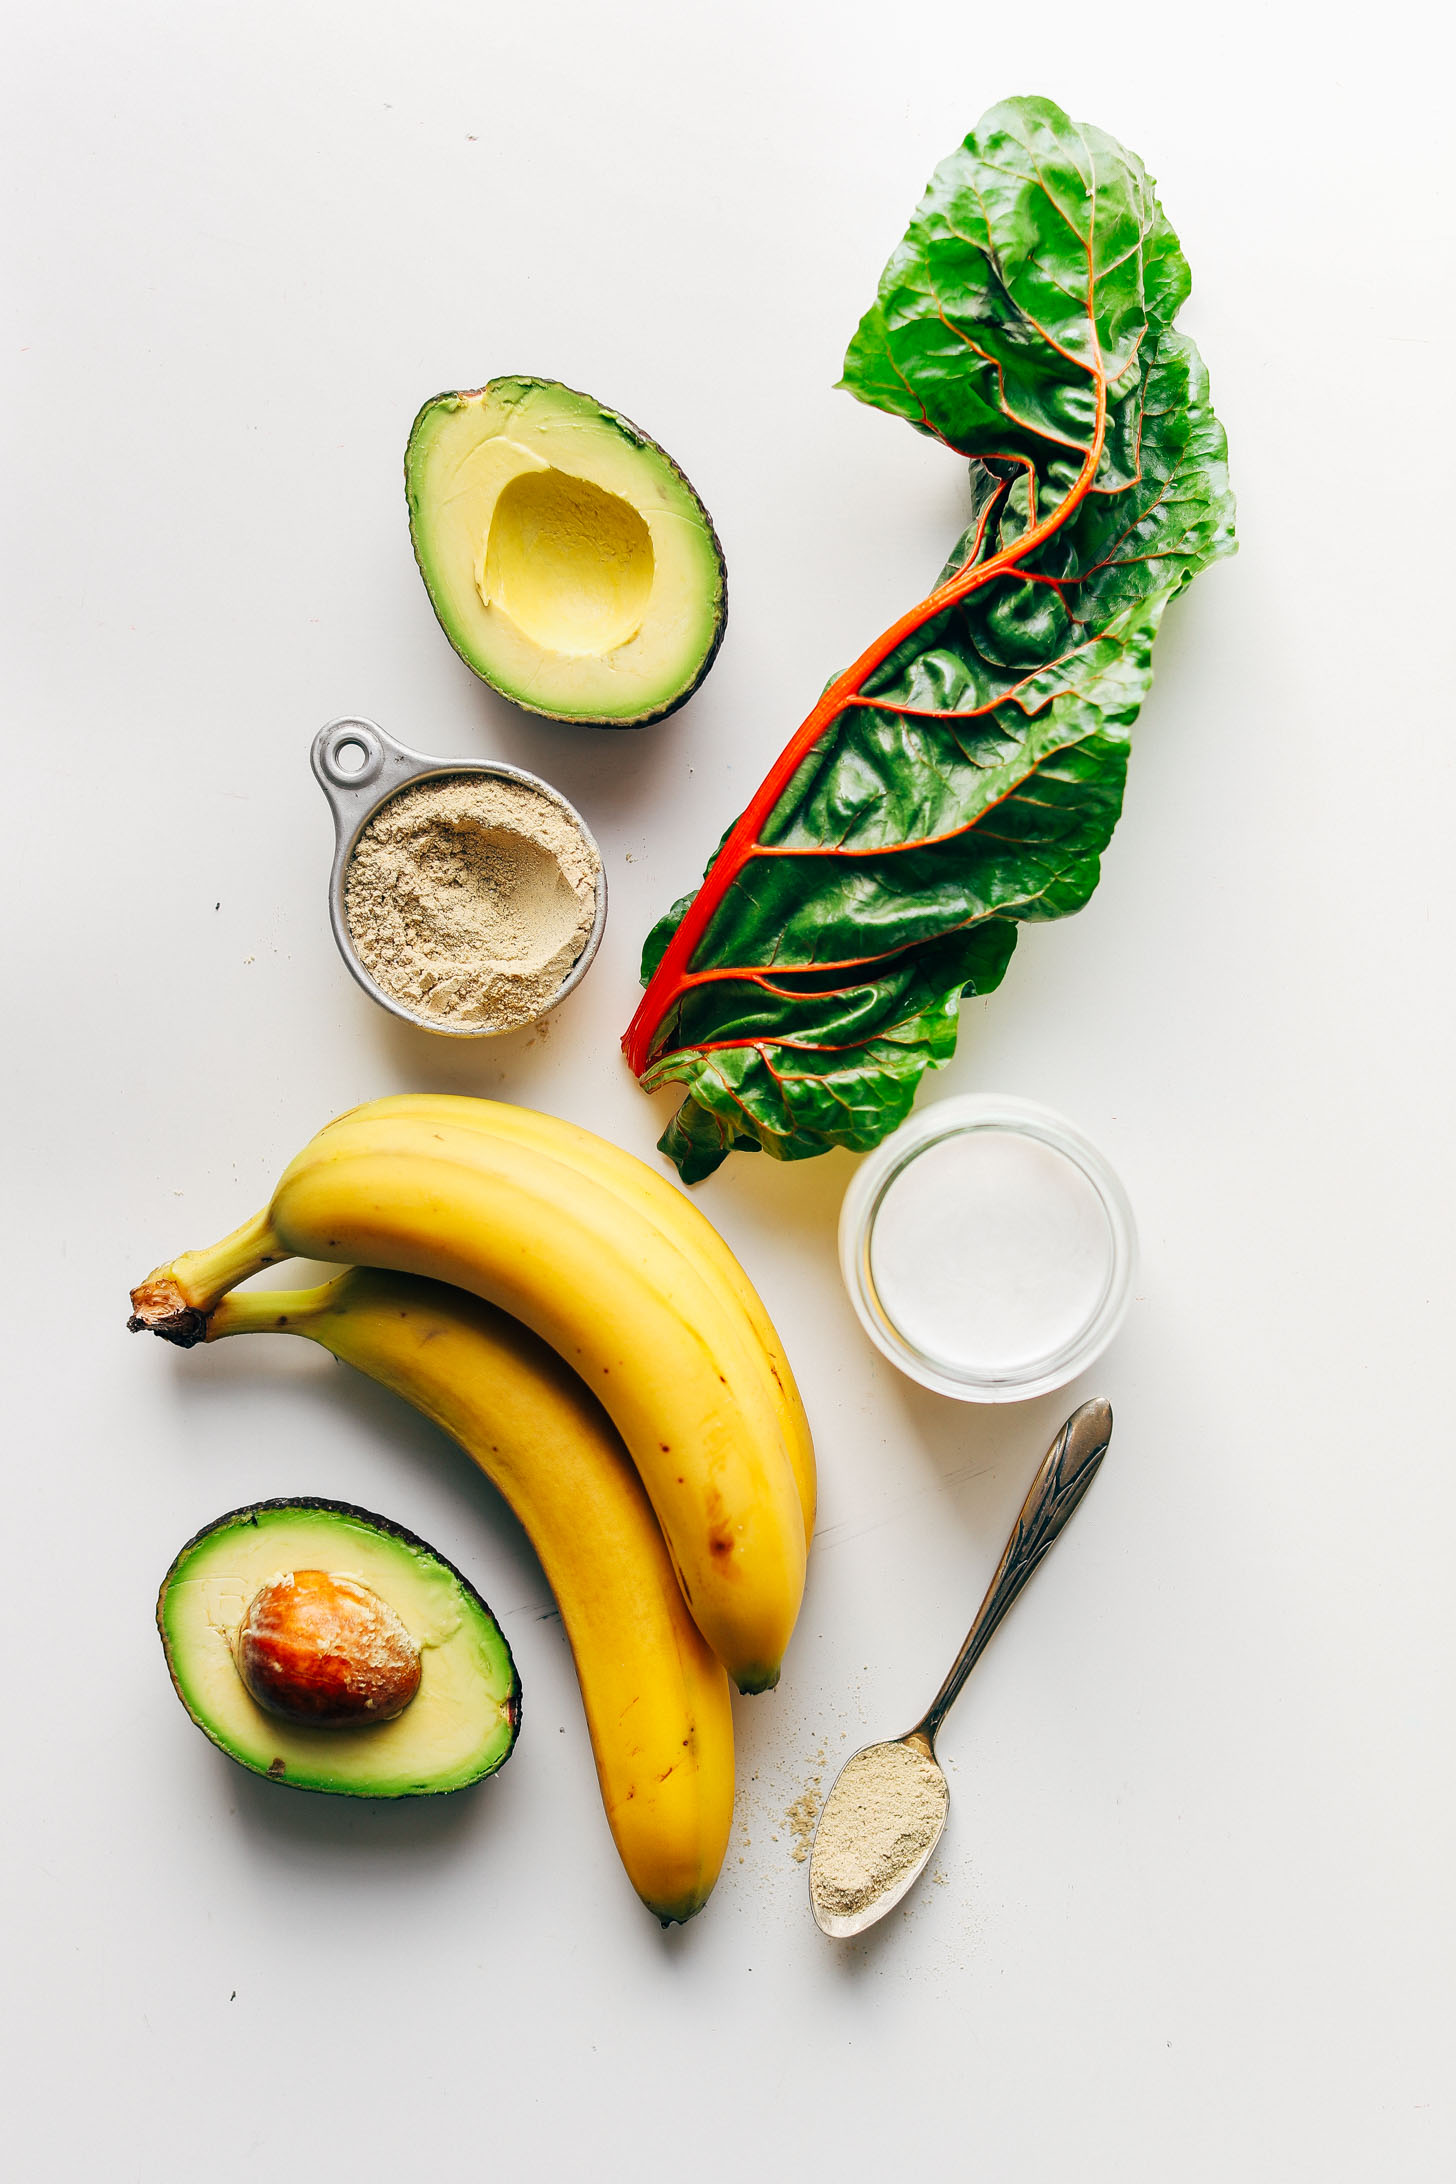 Avocado, bananas, chard, vanilla protein powder, almond milk, and maca laid out for making our Creamy Avocado Green Smoothie recipe